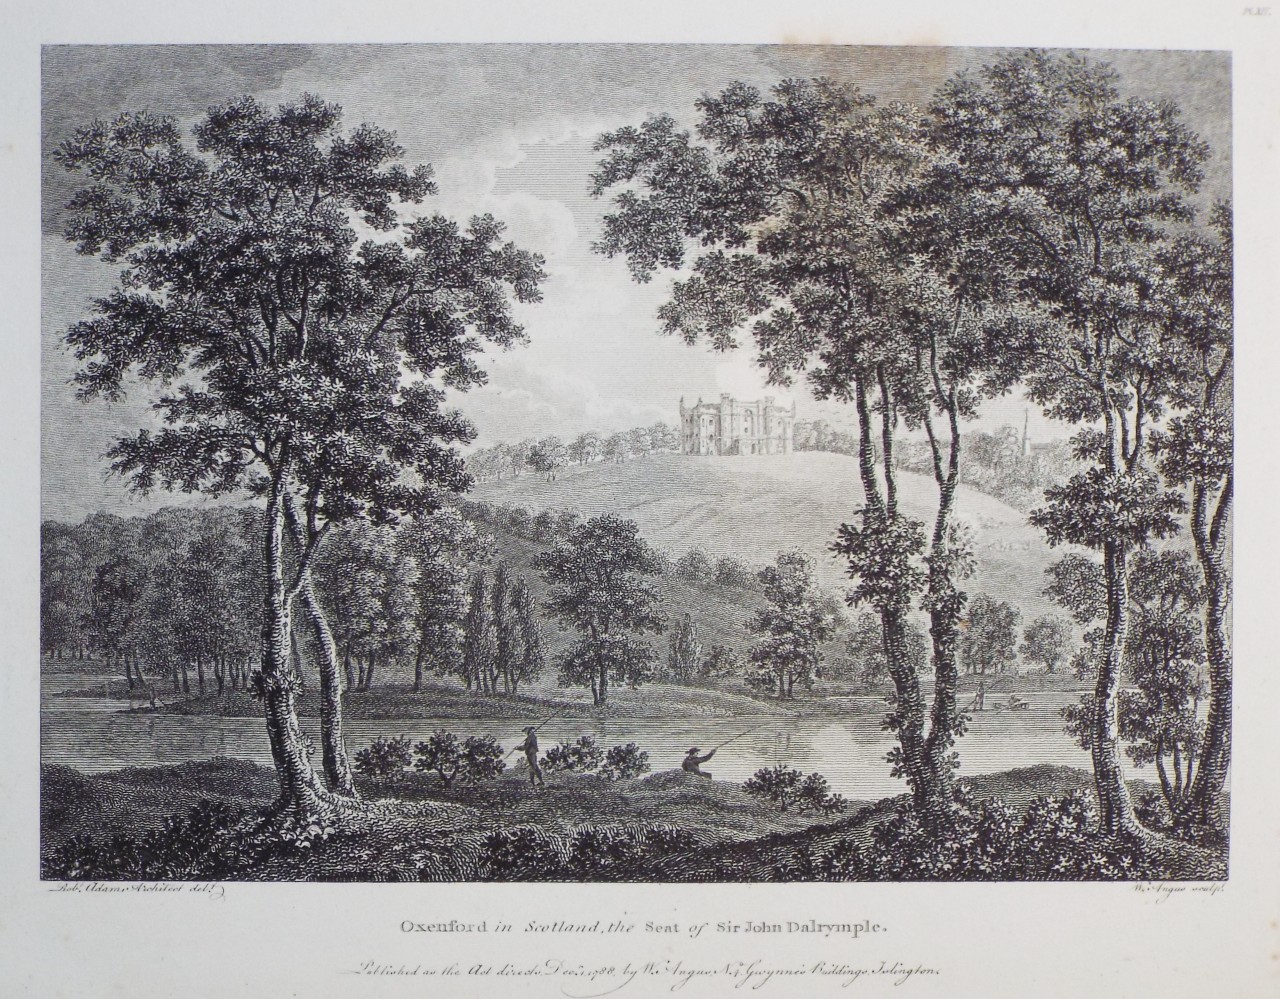 Print - Oxenford in Scotland, the Seat of Sir John Dalrymple. - Angus